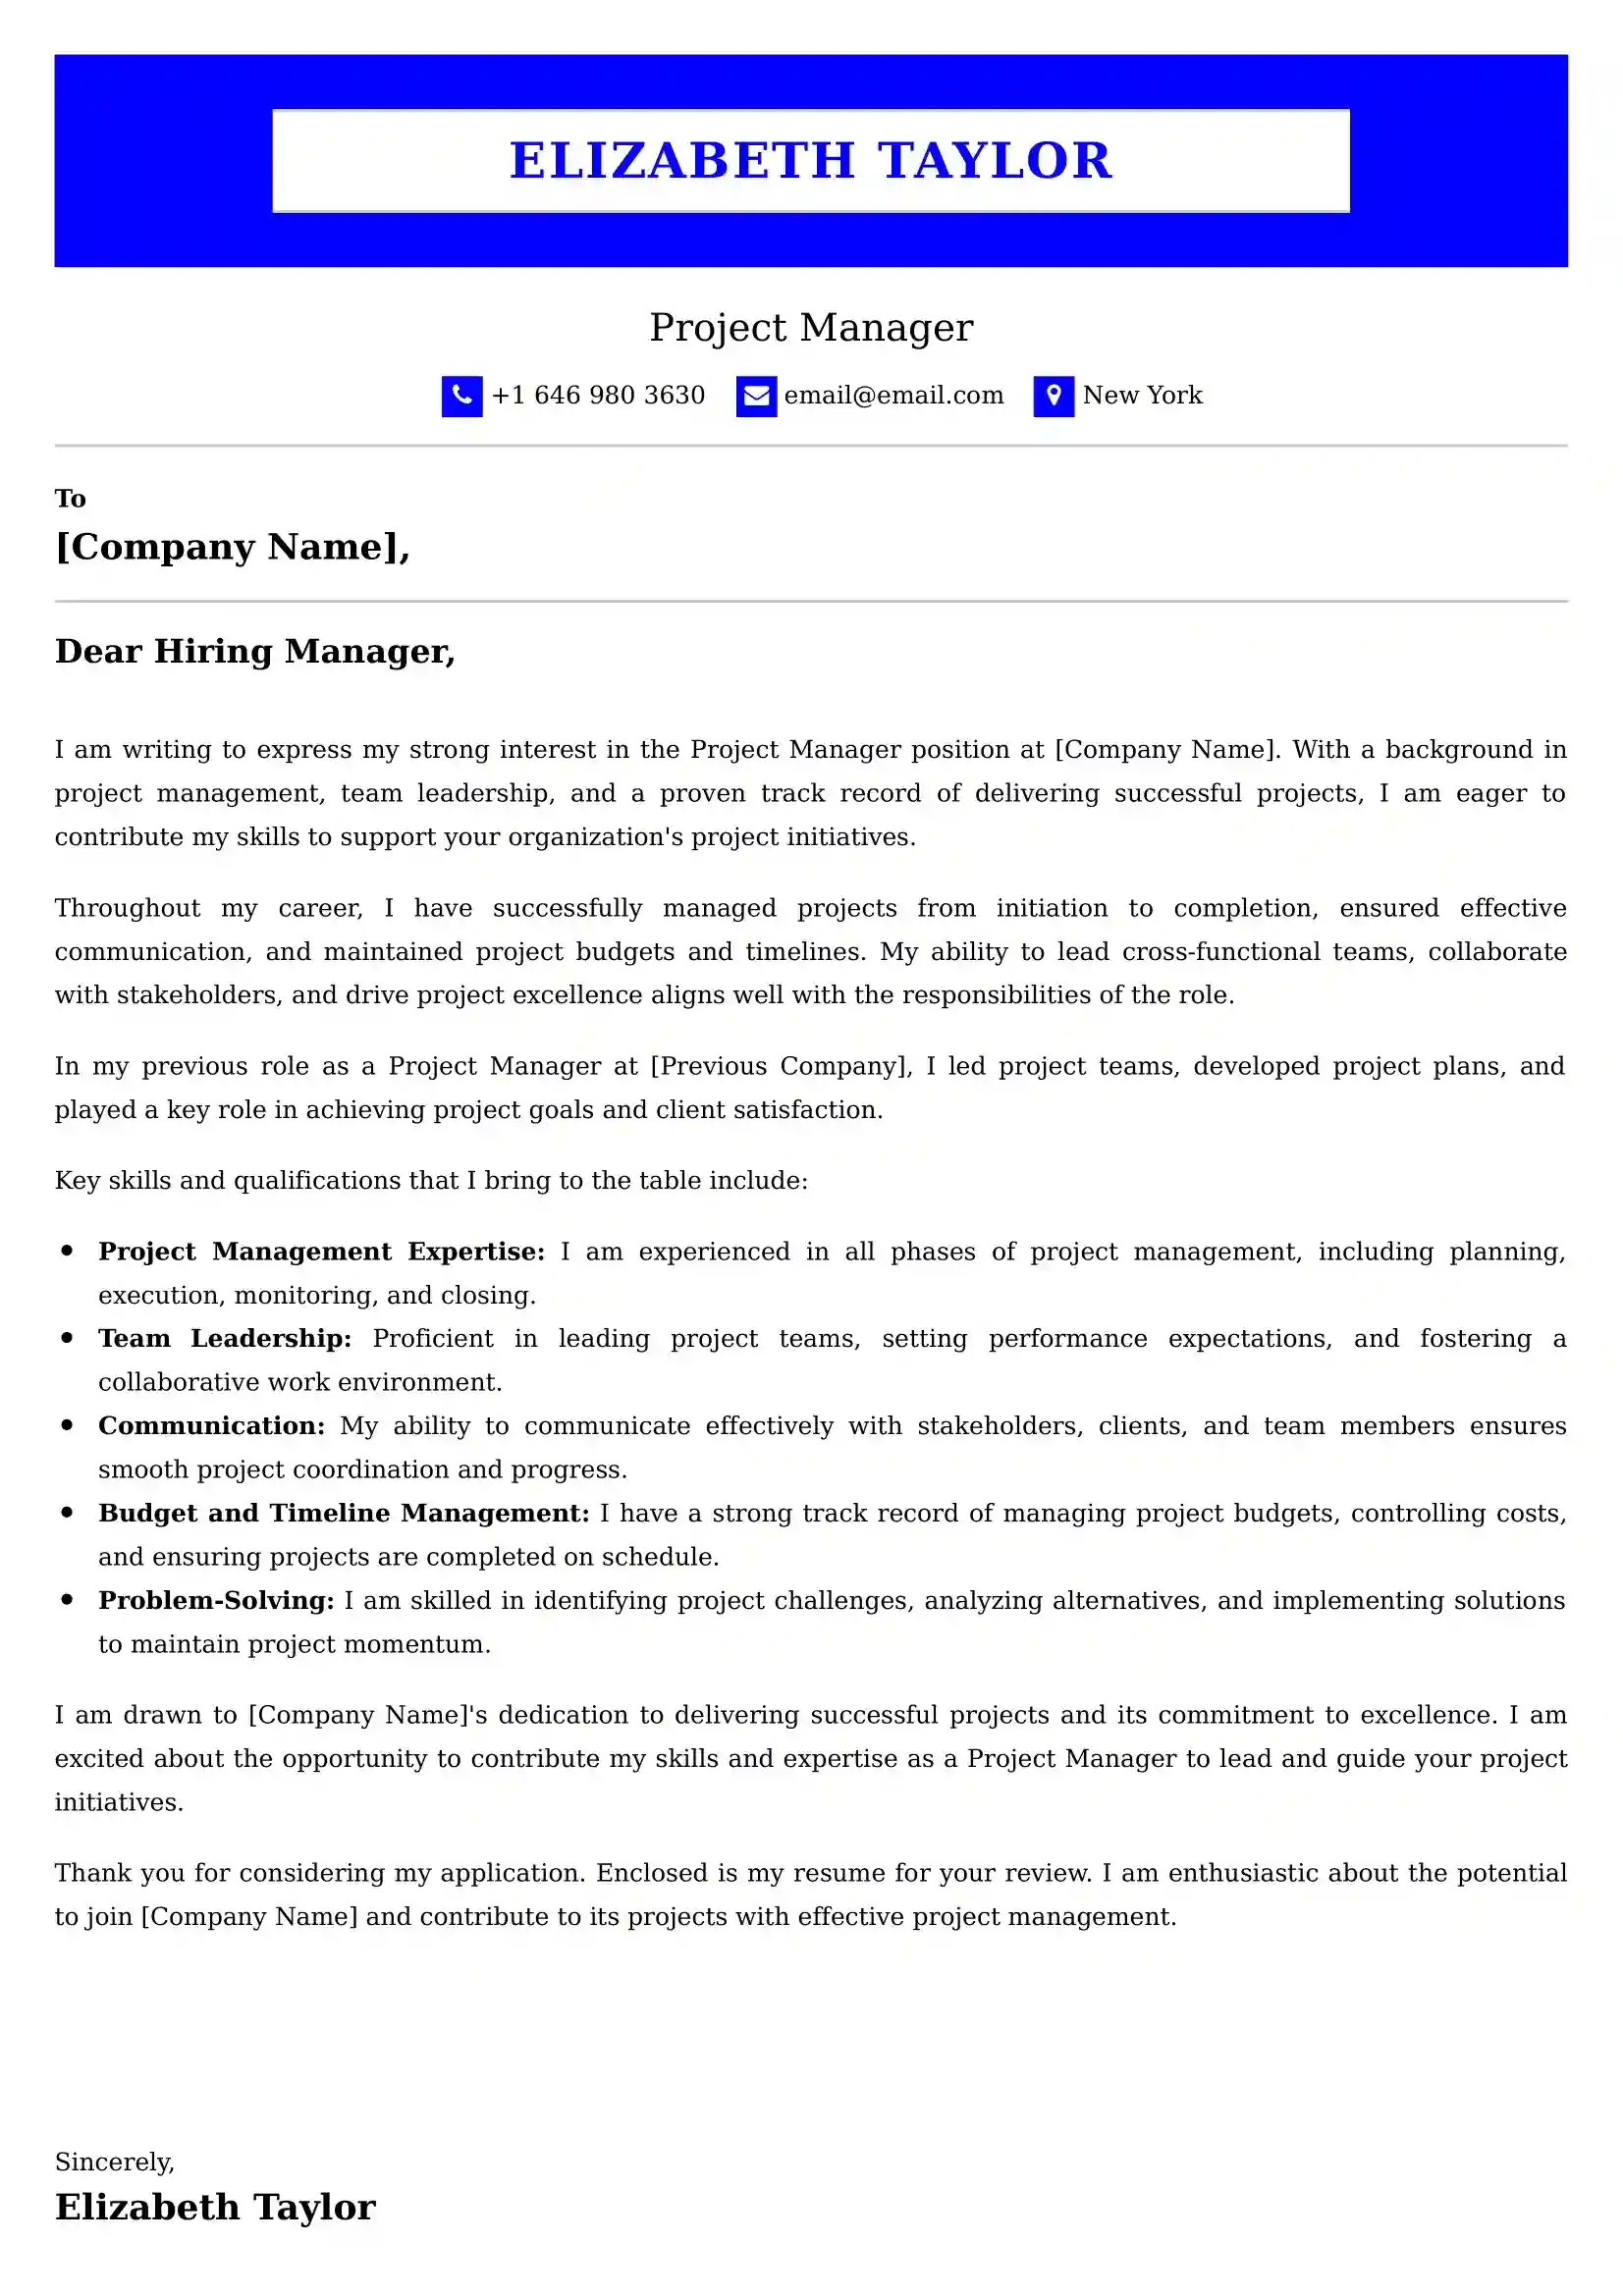 Project Manager Cover Letter Examples Australia